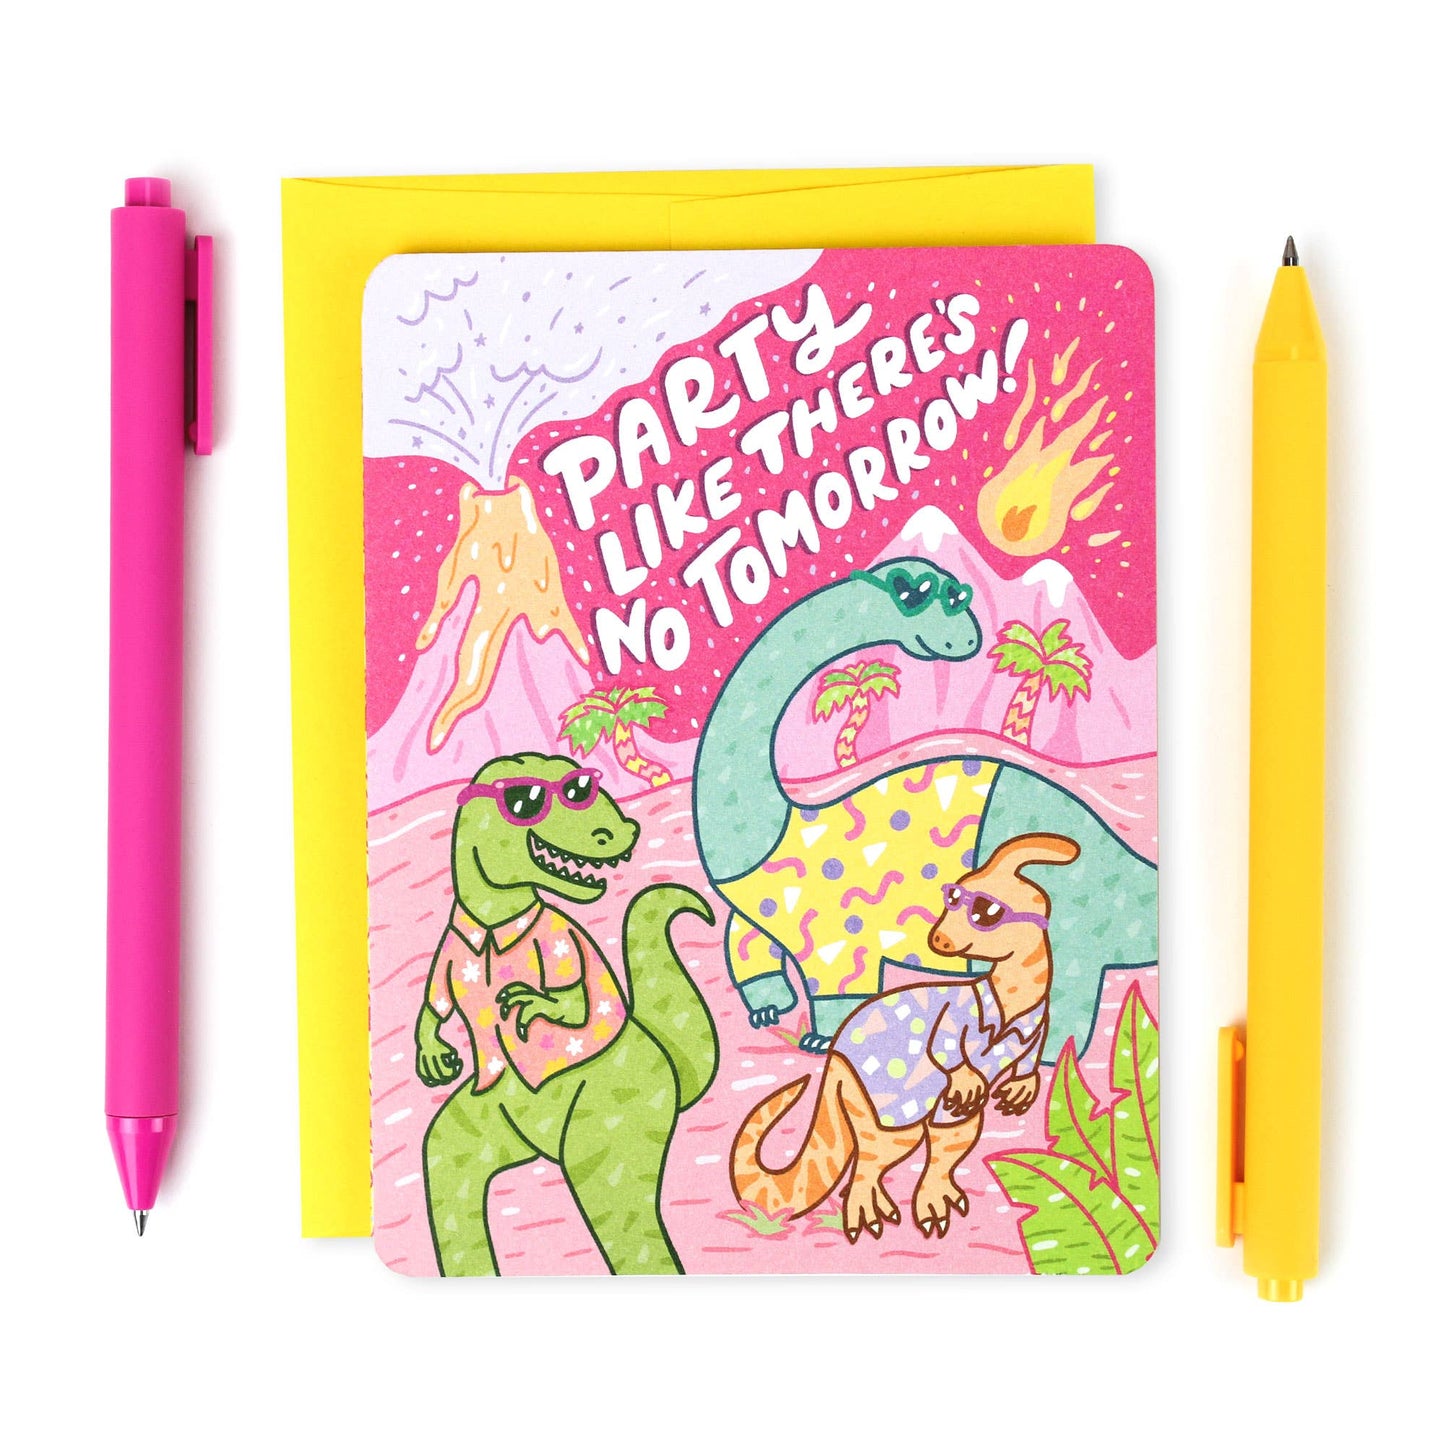 Dinosaur Party like there's no tomorrow birthday card with yellow envelope by Turtle's Soup